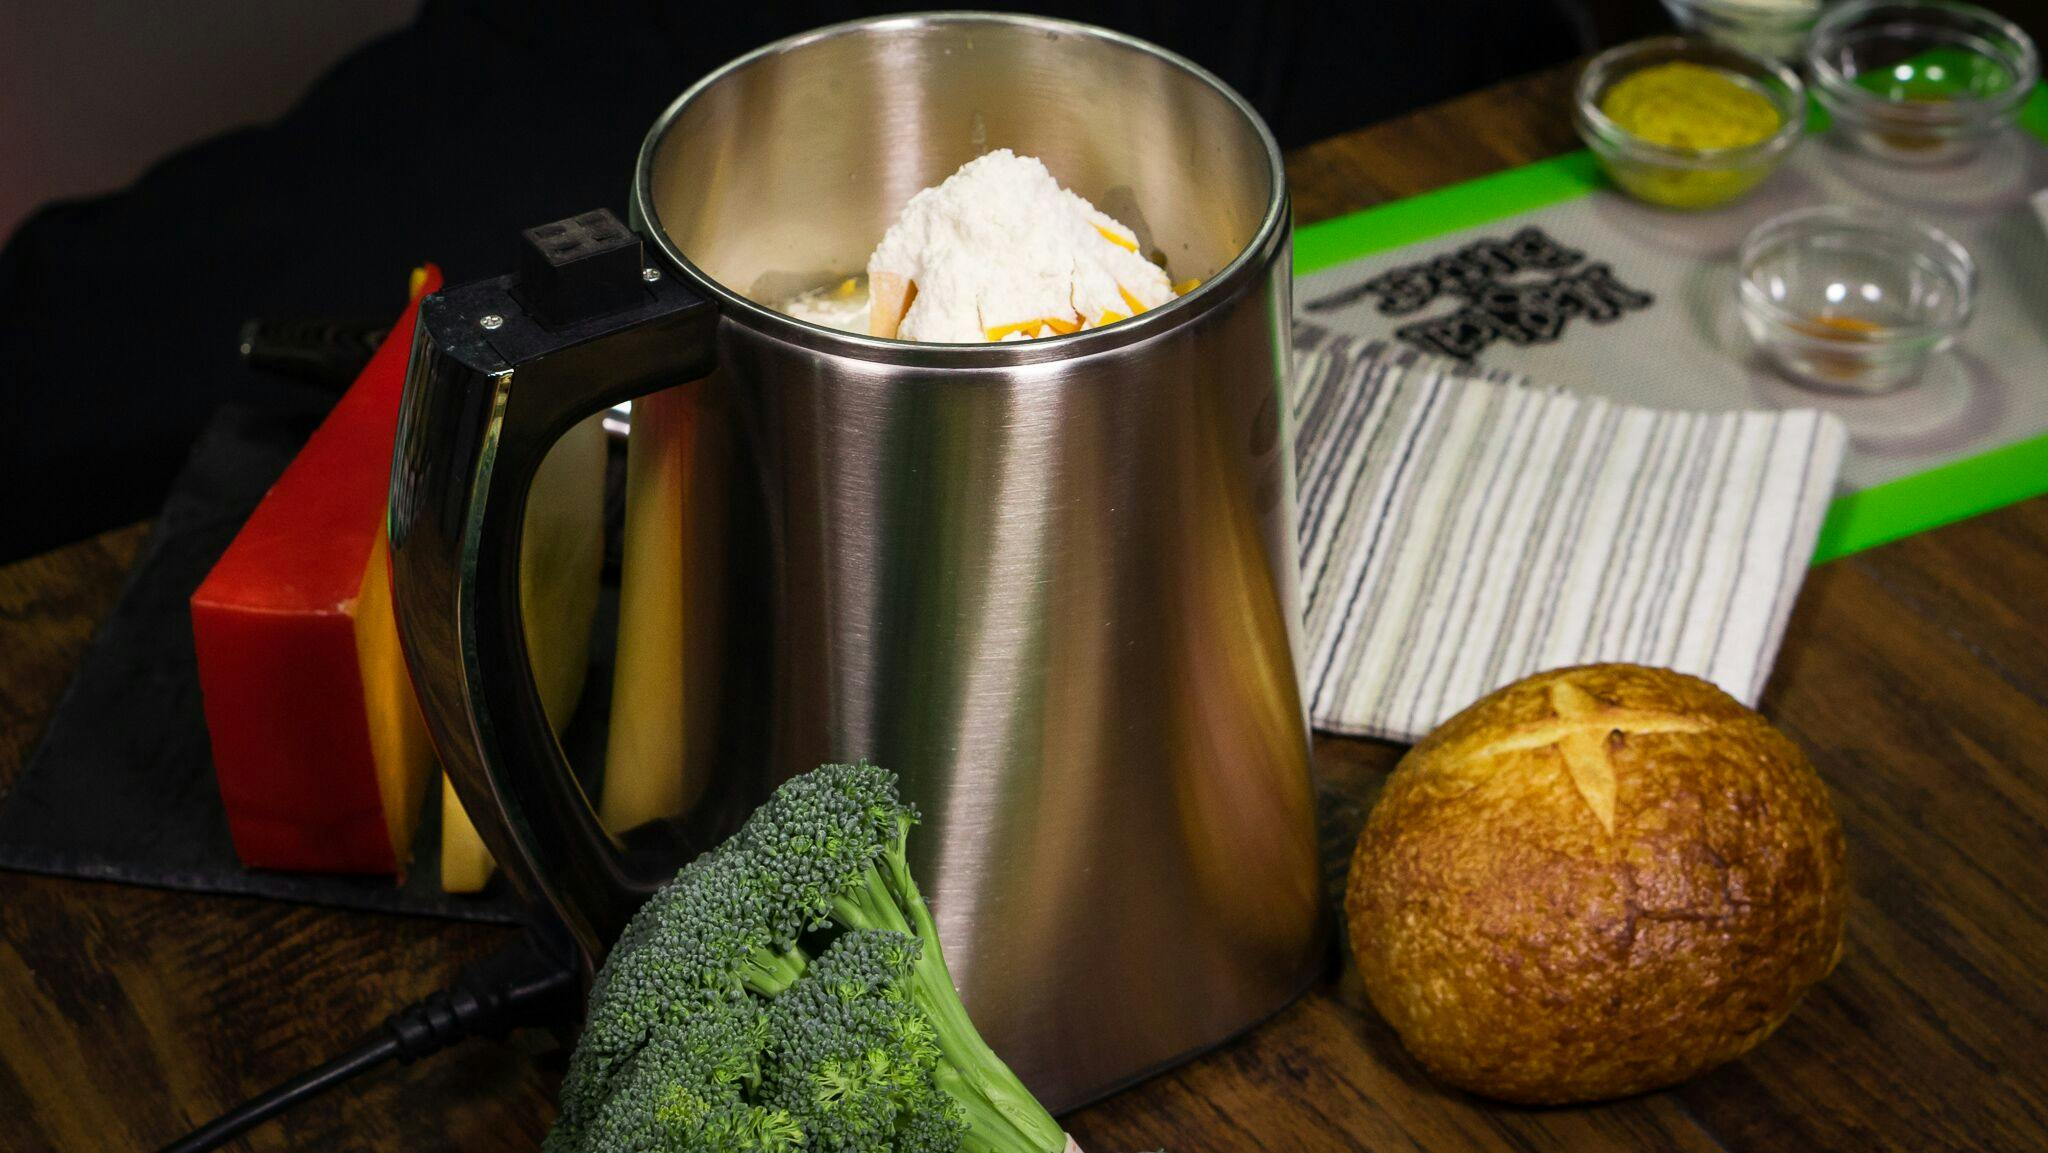 Y3jia8cQ 5 Reasons The MagicalButter Machine Is A Must Have When Youre Cooking With Cannabis